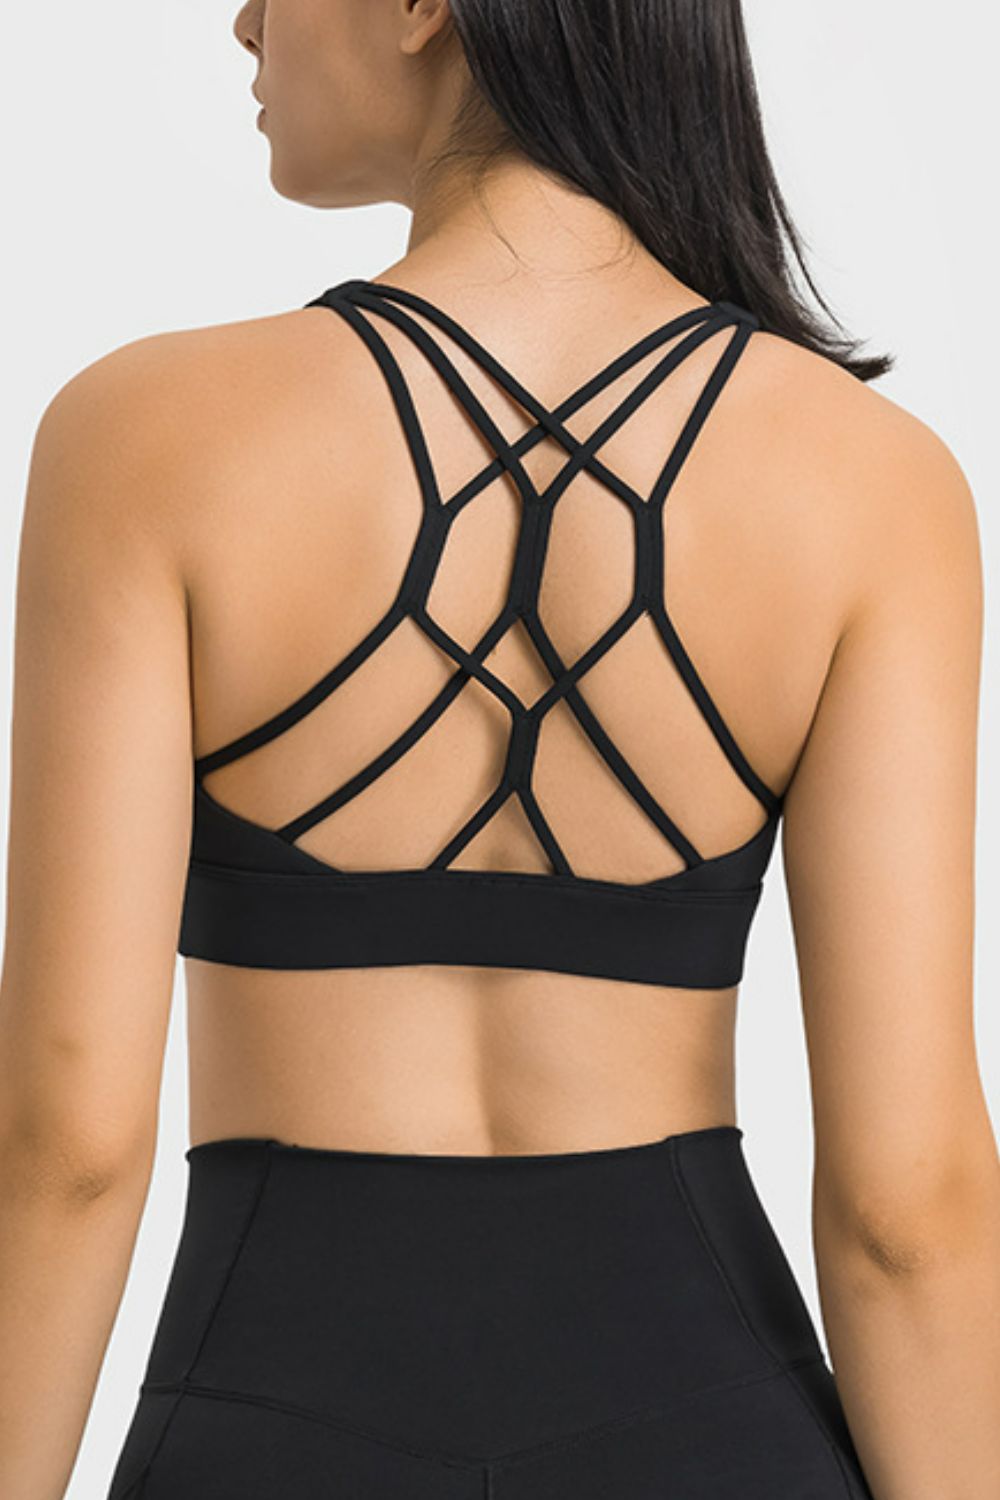  Charly Womens Sports Bra Strappy Criss Cross Back